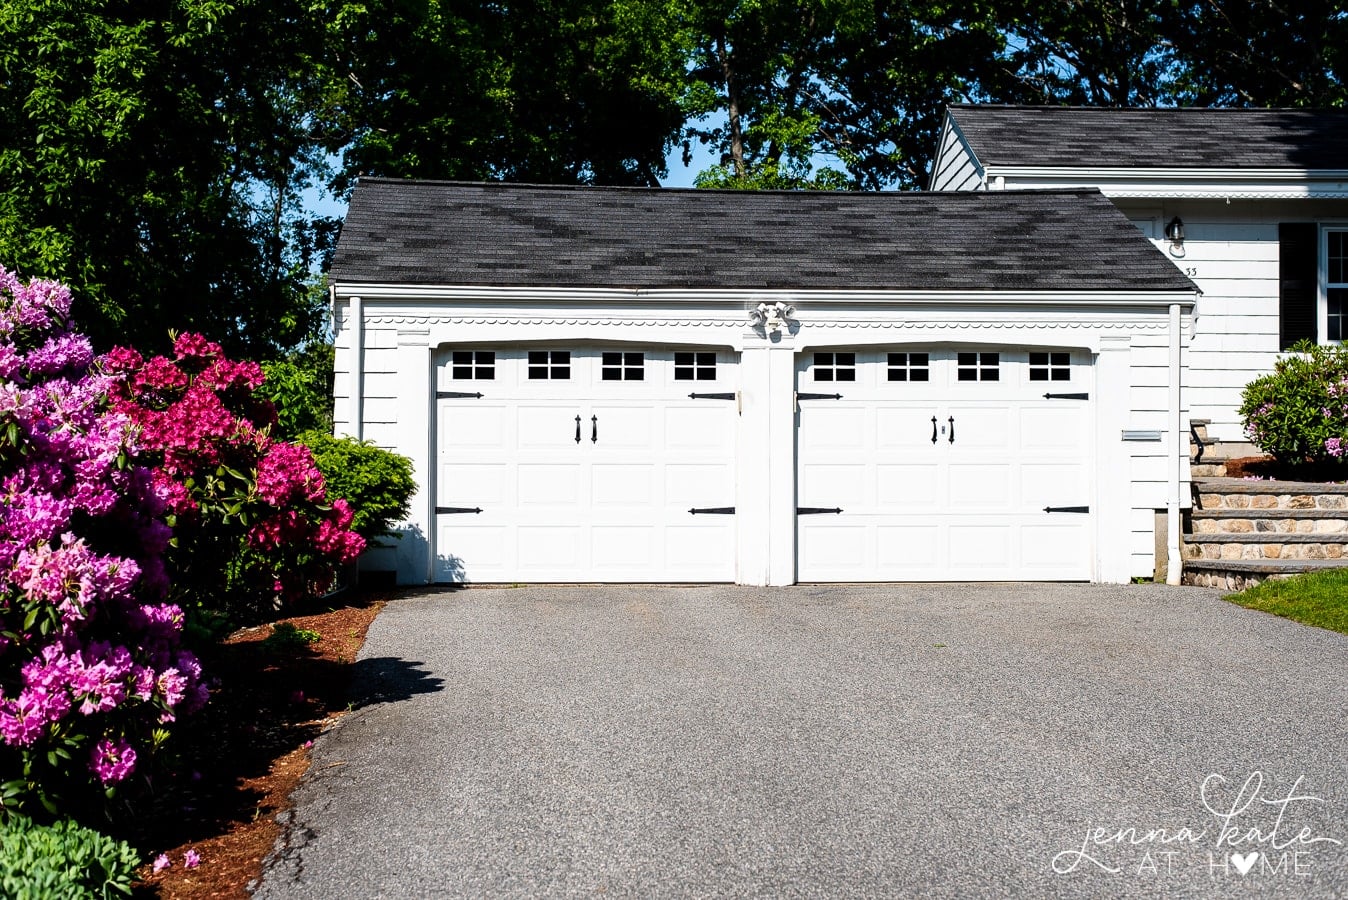 A double garage with black vinyl decals (representing windows) and plastic hardware